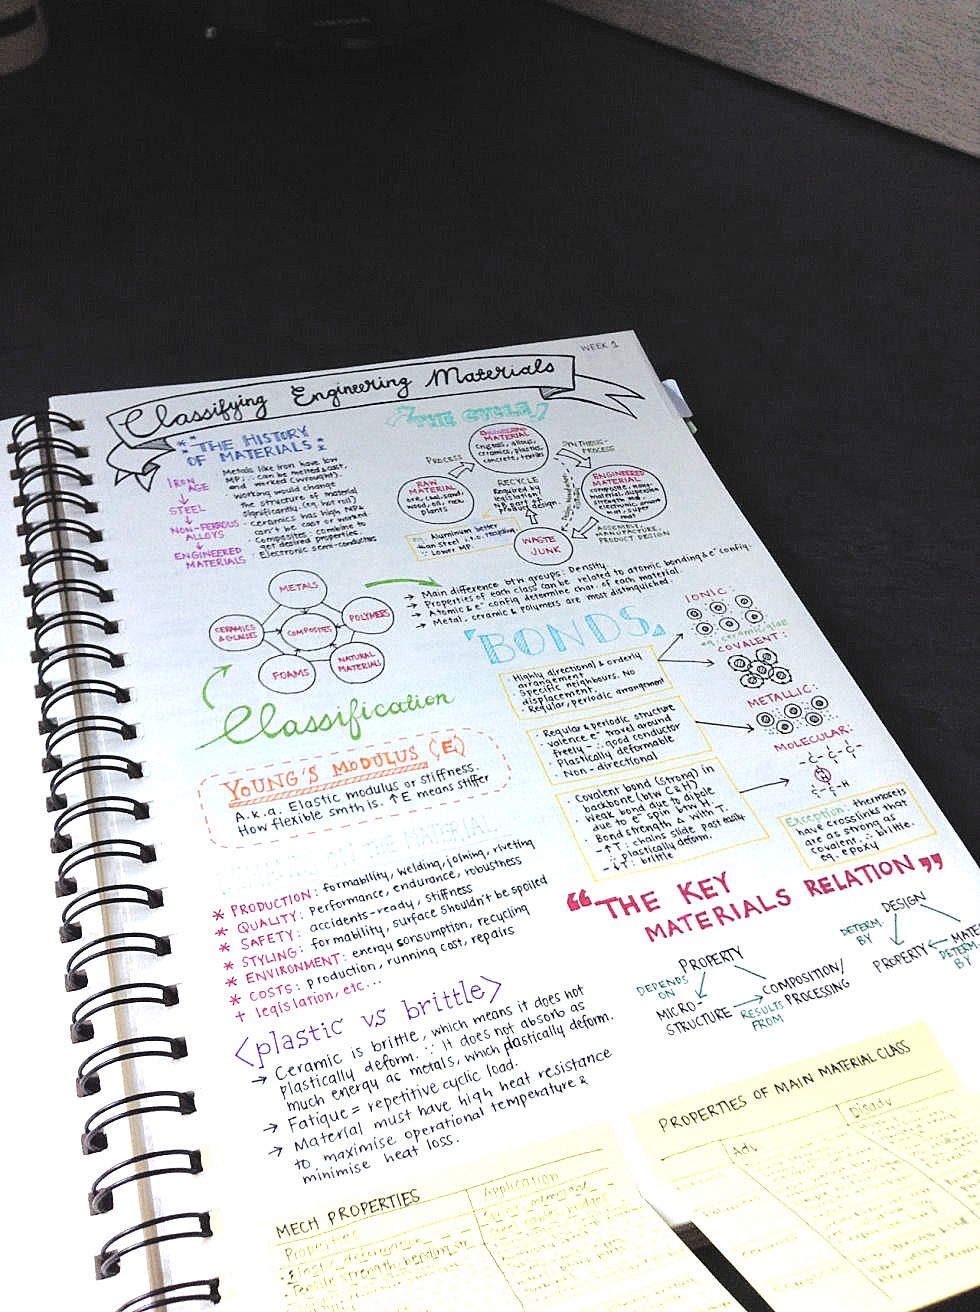 20 Pretty Pictures Of Class Notes That Will Inspire You To